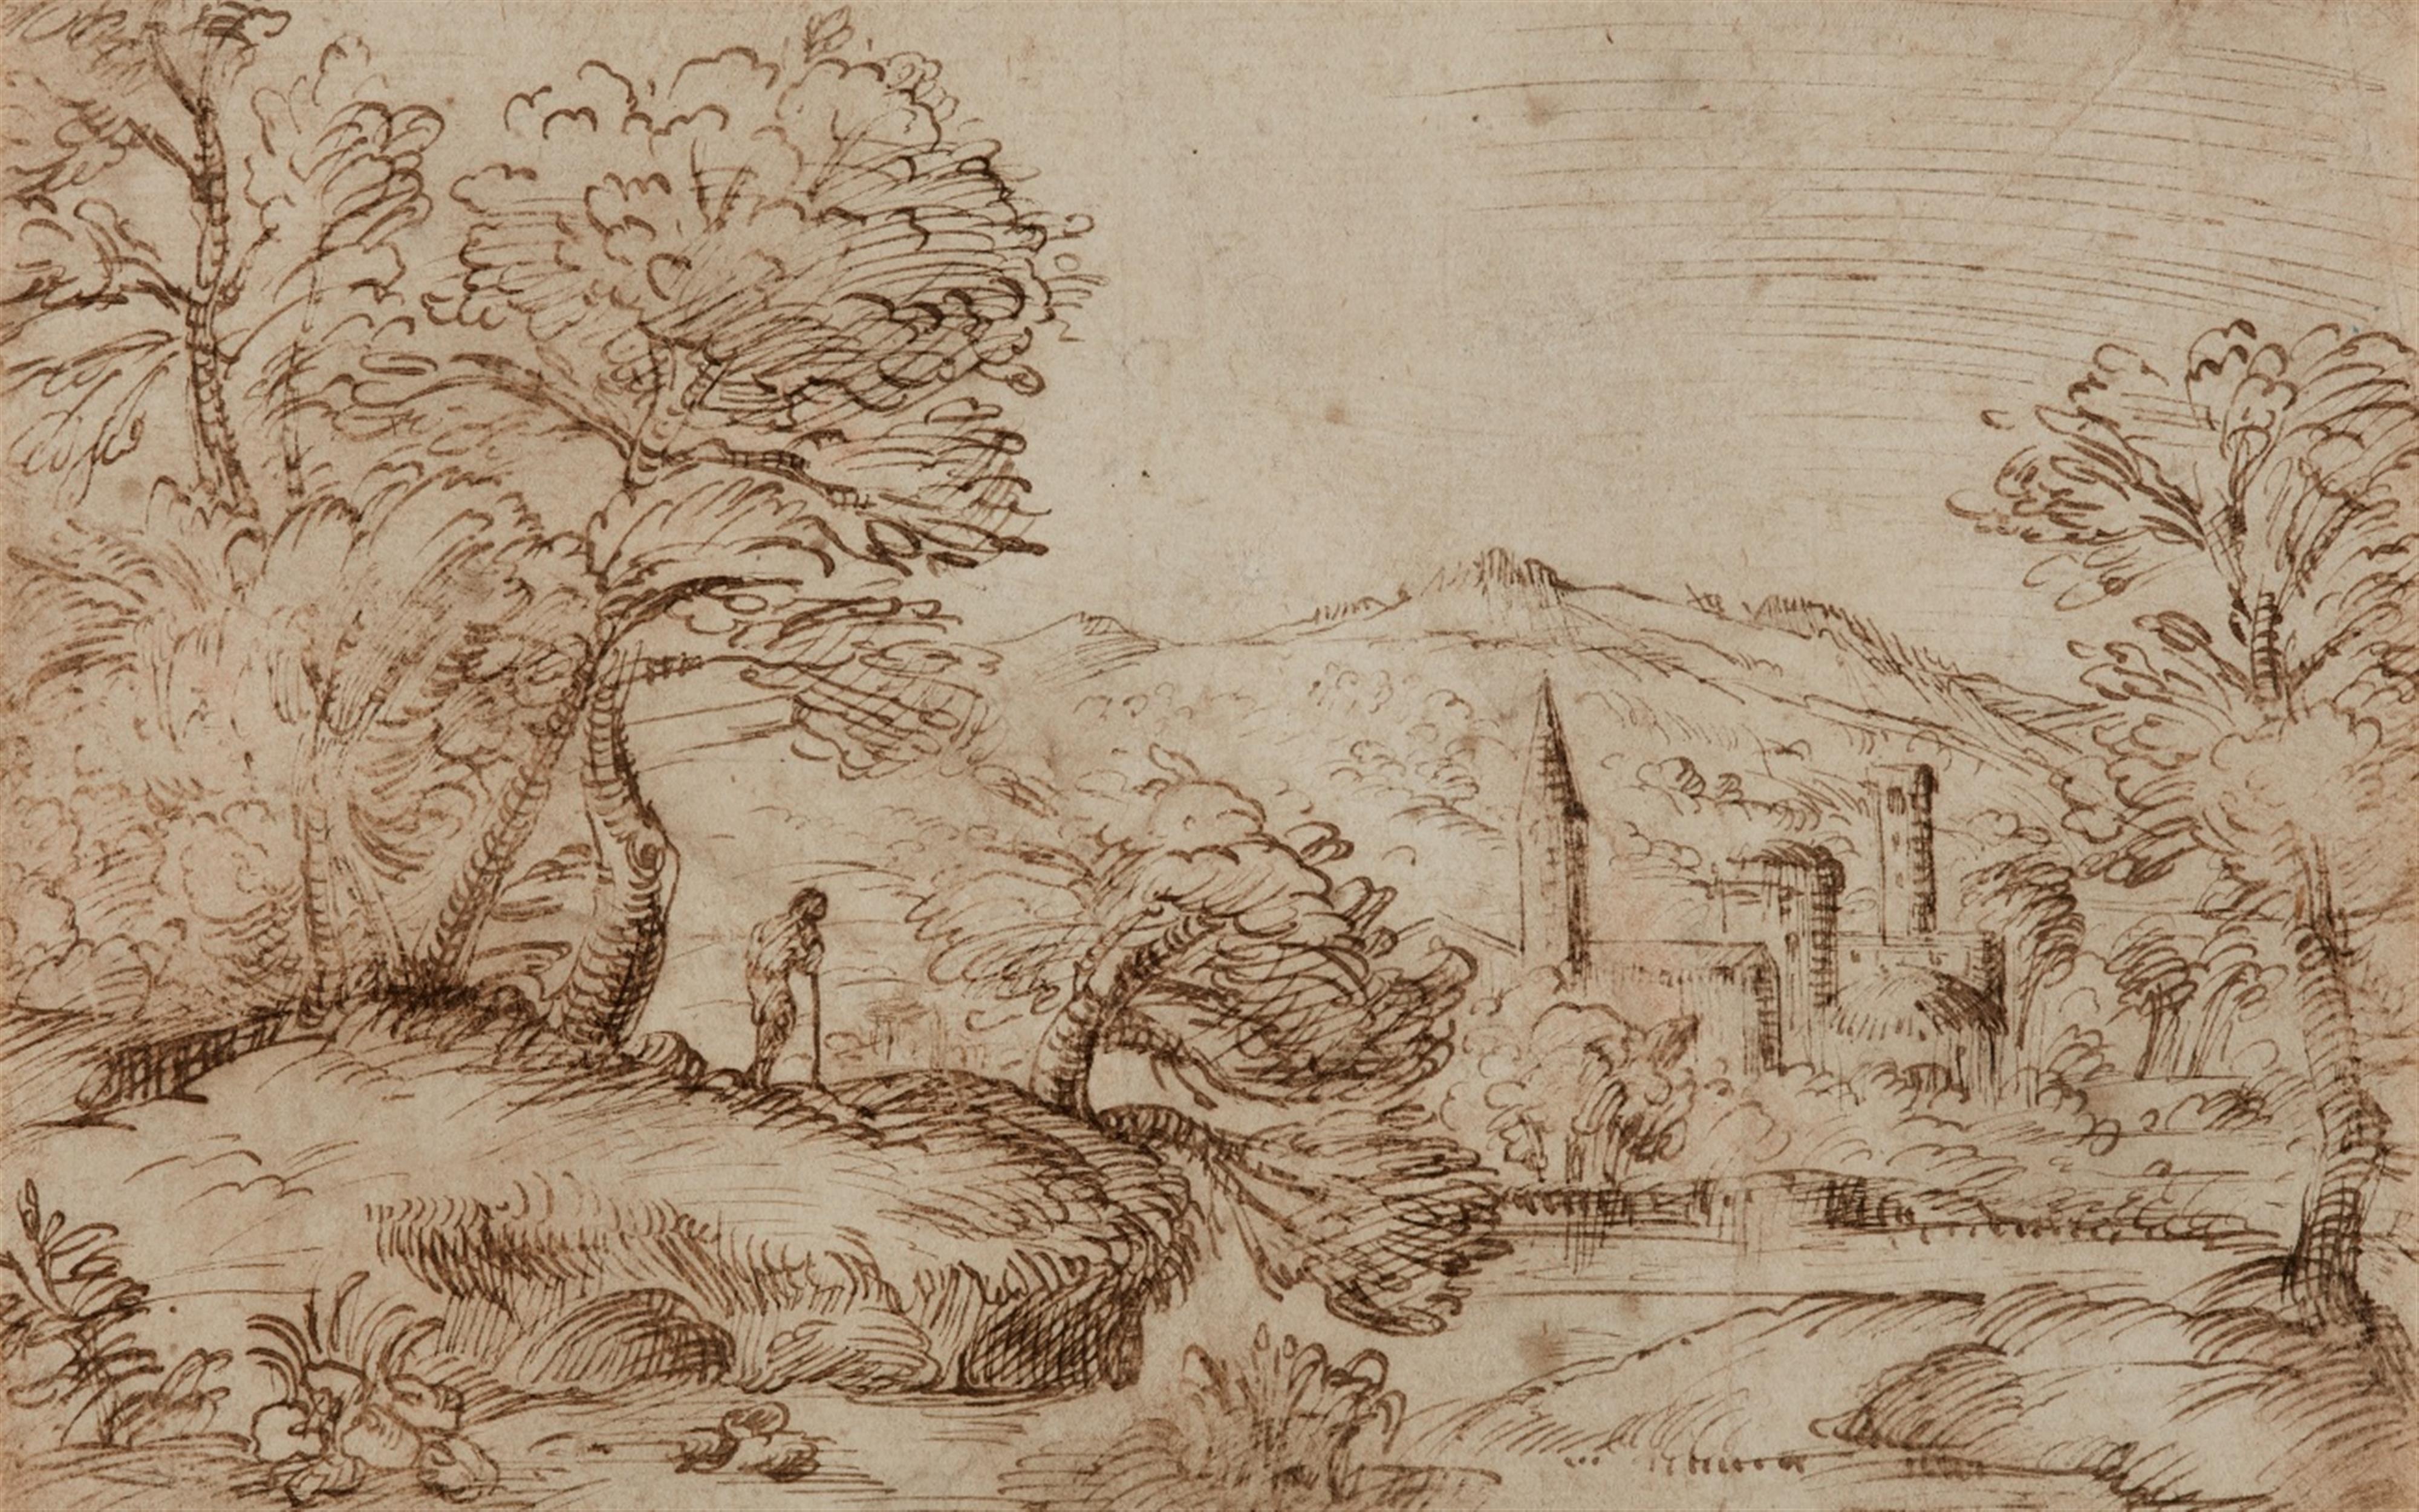 Bolognese School of the 17th century - Hilly River Landscape with a Rambler and a Town - image-1